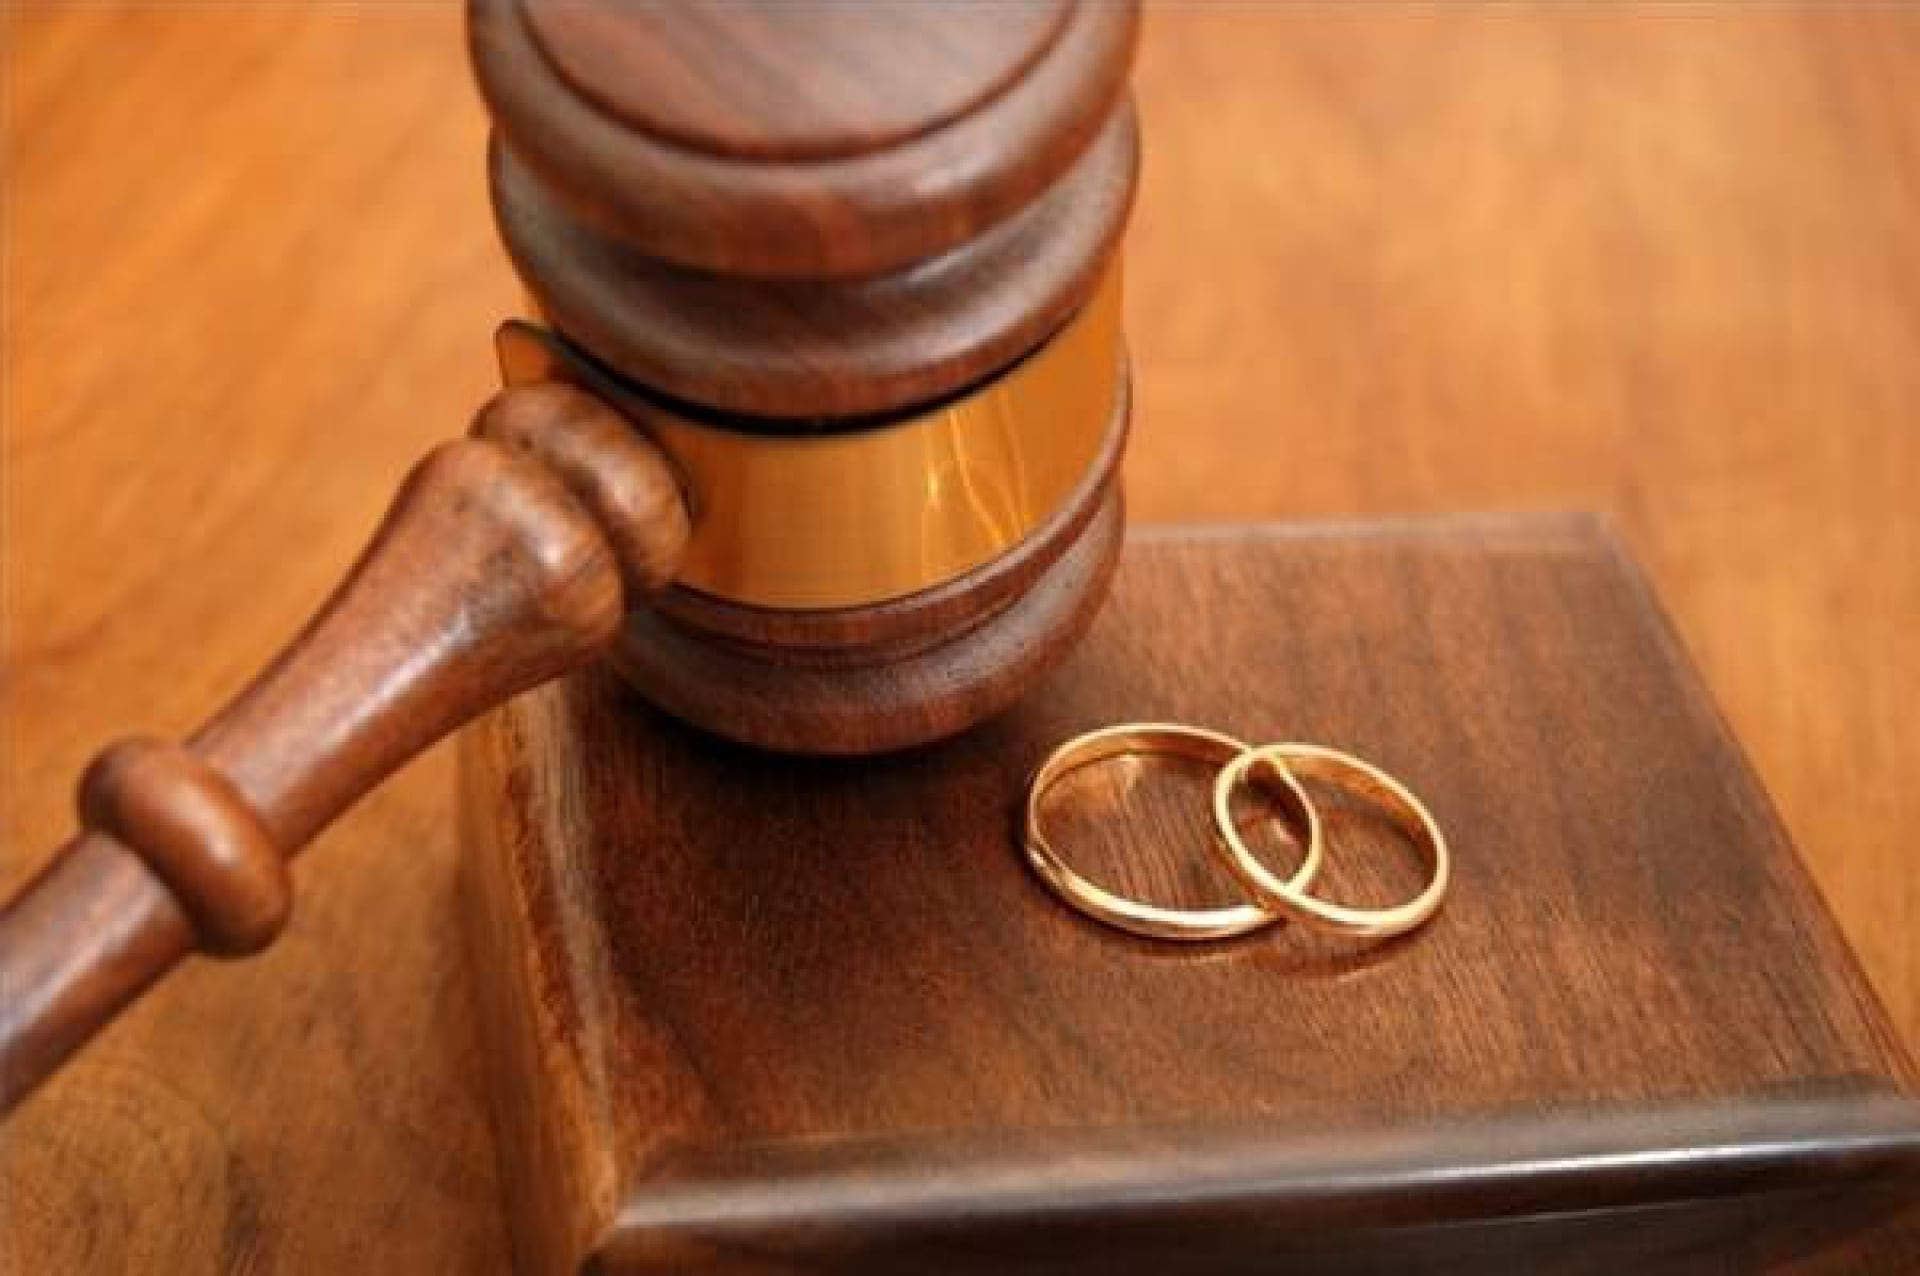 A judges hammer and two wedding rings